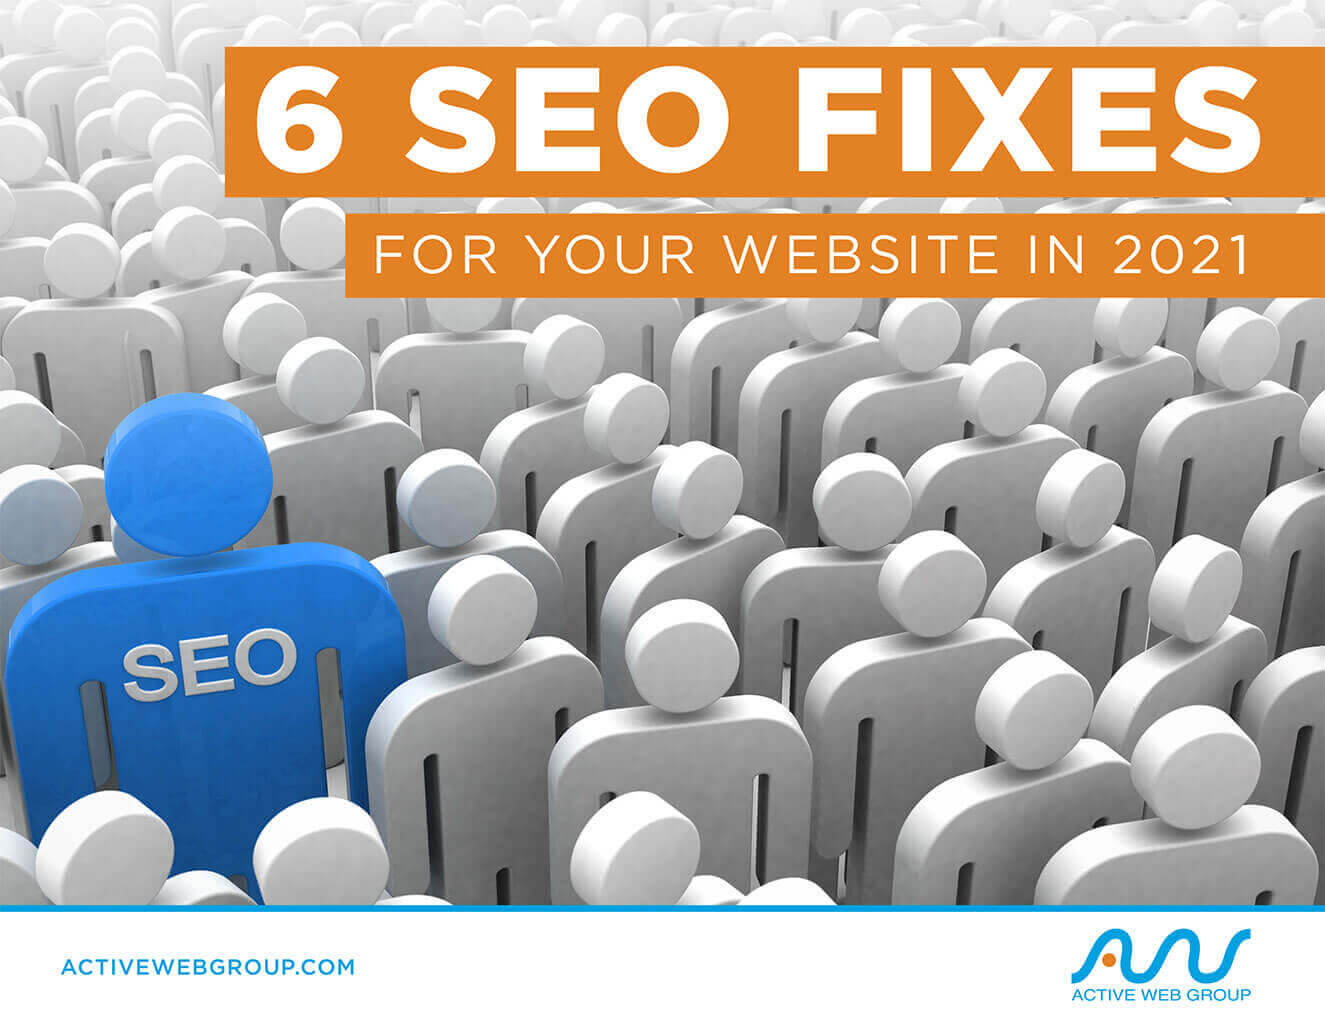 Top SEO Fixes for Your Website